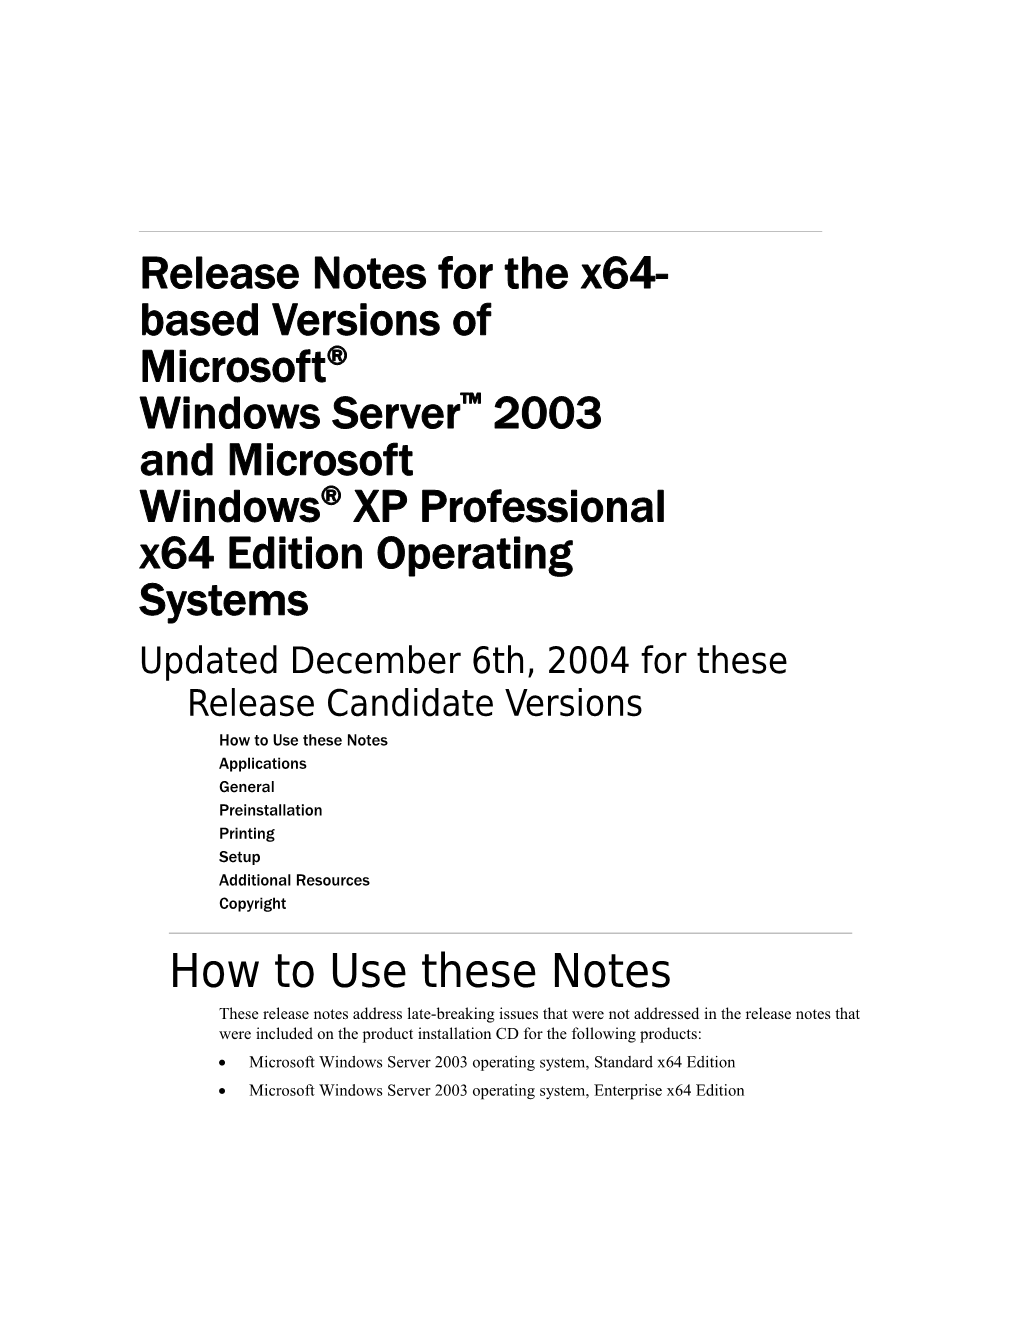 Release Notes for the X64-Based Versions Of